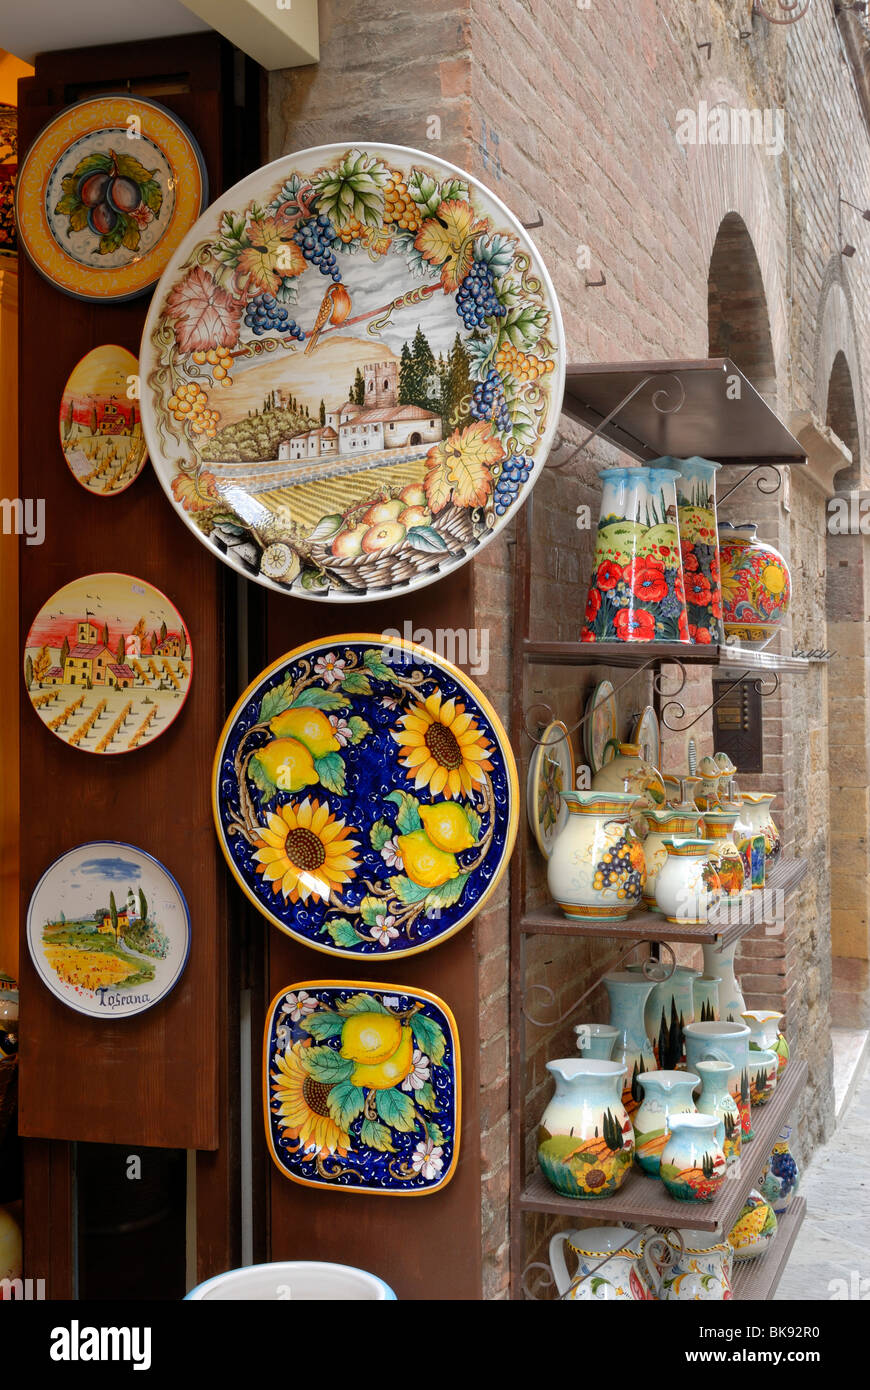 San Gimignano is very famous for its brightly coloured ceramic works. Ceramic shops in Via San Matteo sell plates, vases, pots.. Stock Photo